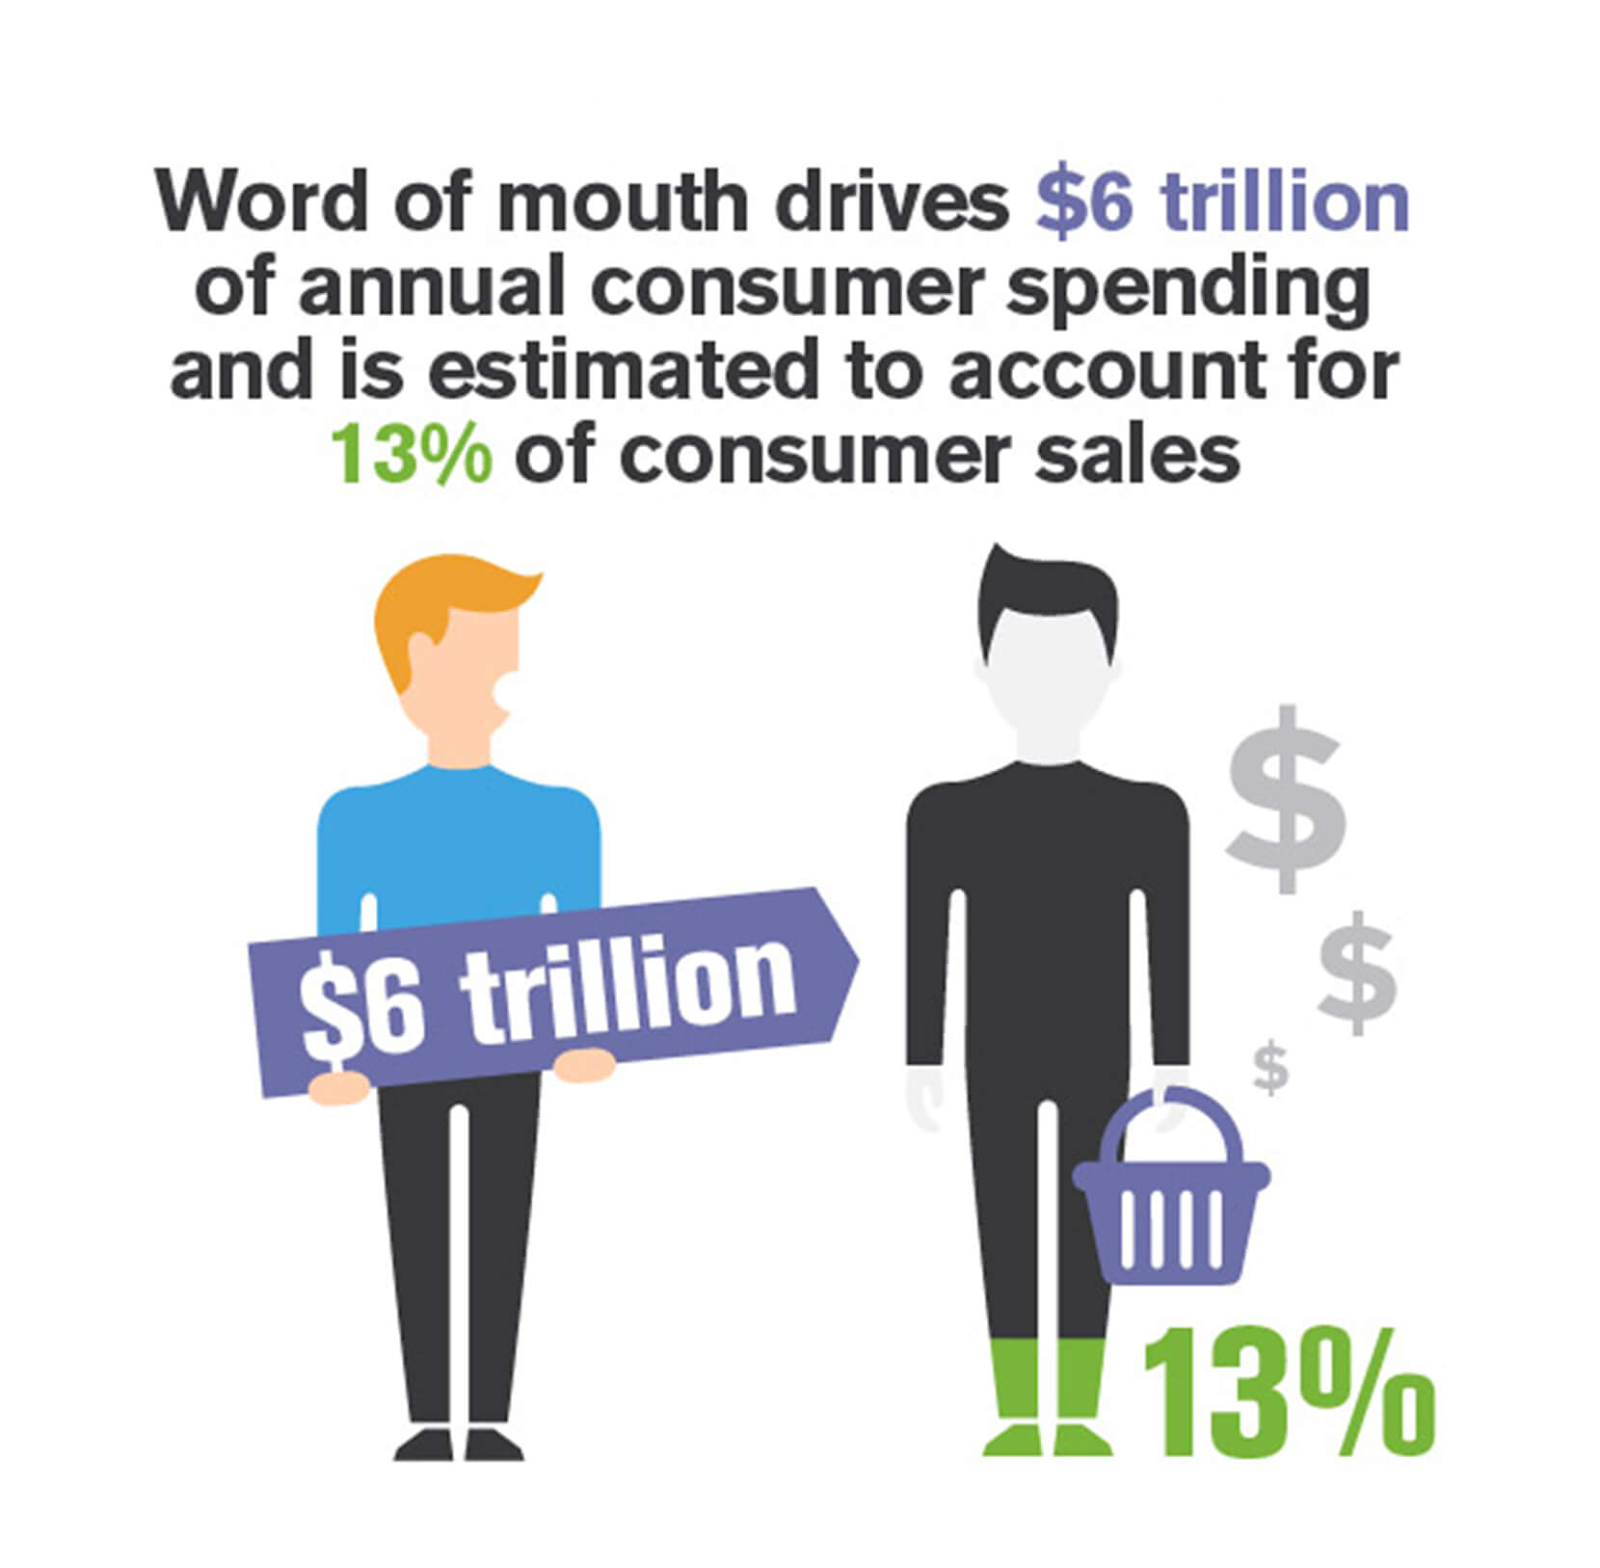 An infographic that states that word-of-mouth drives $6 trillion of annual consumer spending. 